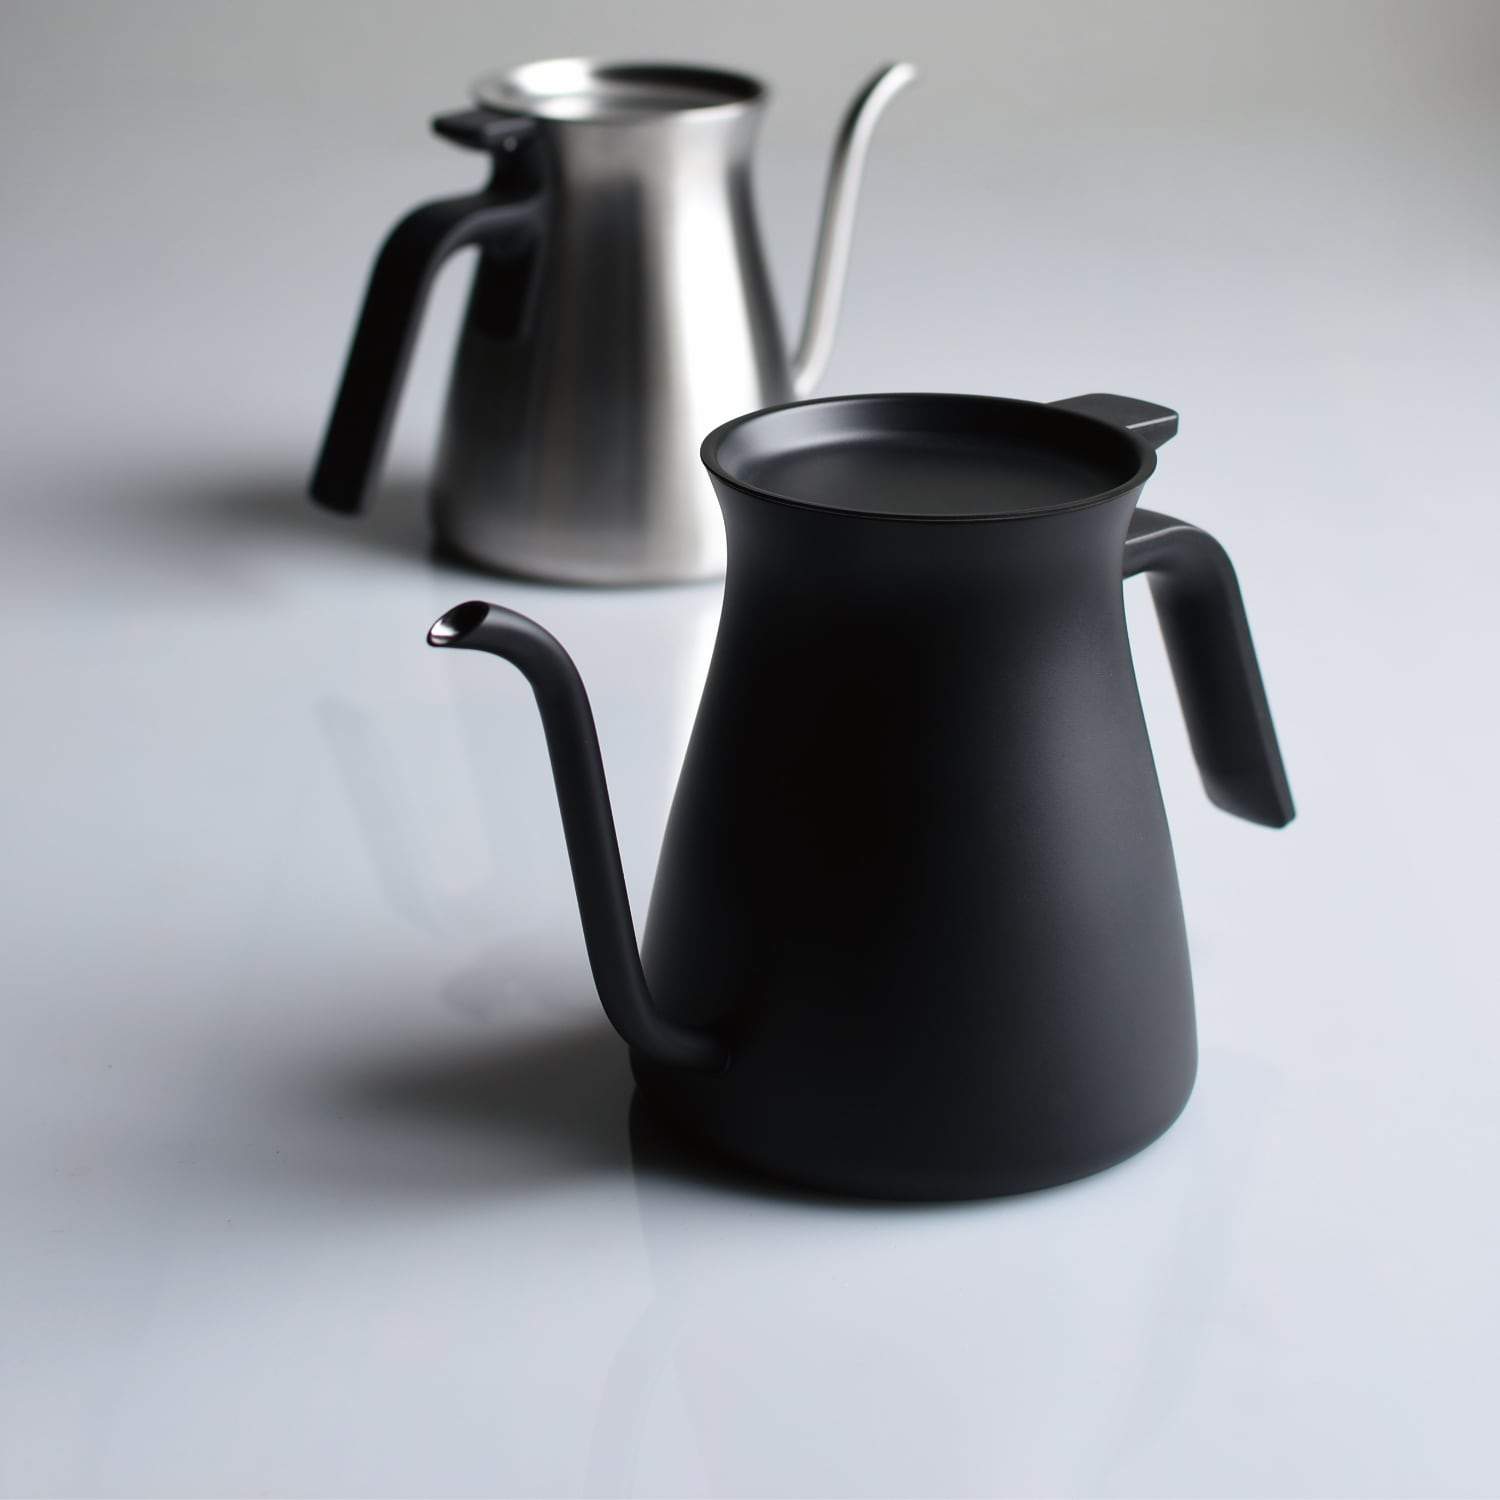 KINTO Pour Over Kettle in Black - KANSO